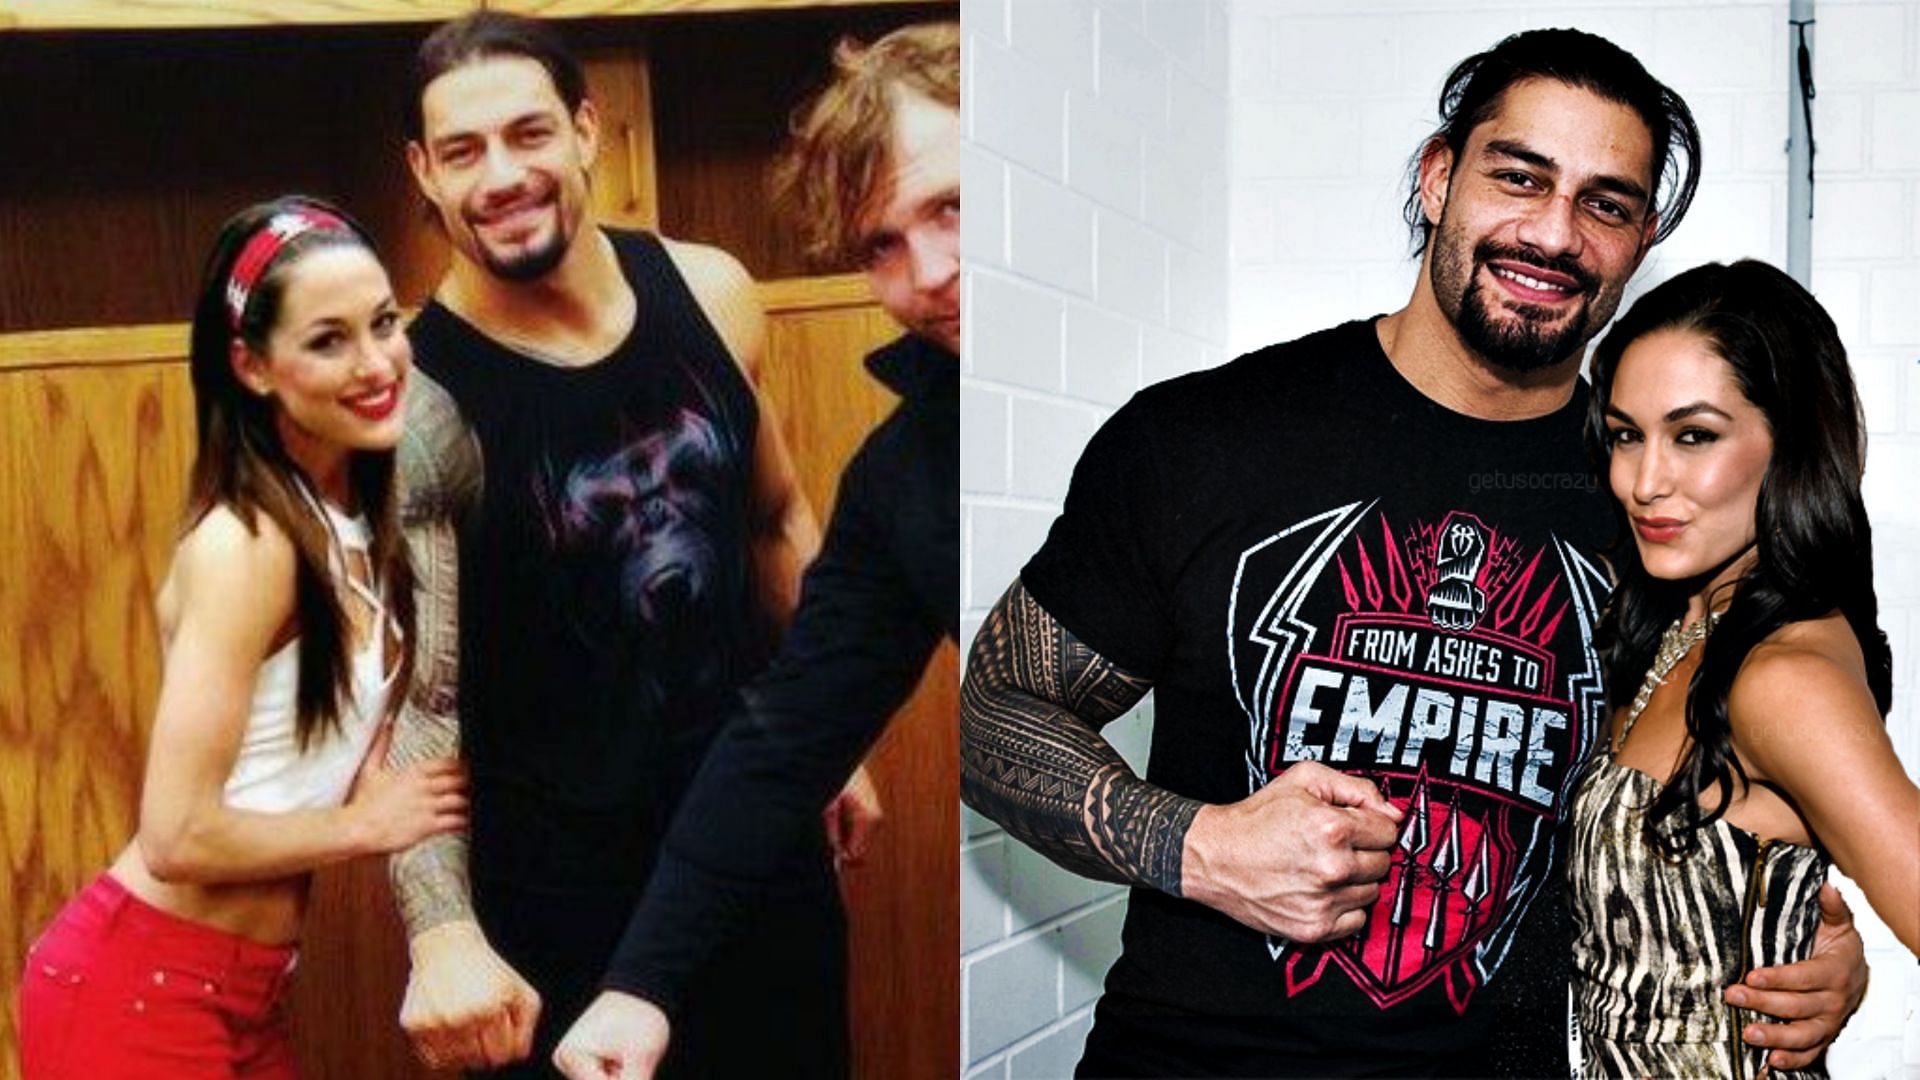 Some fans thought Roman Reigns and Brie Bella were a couple